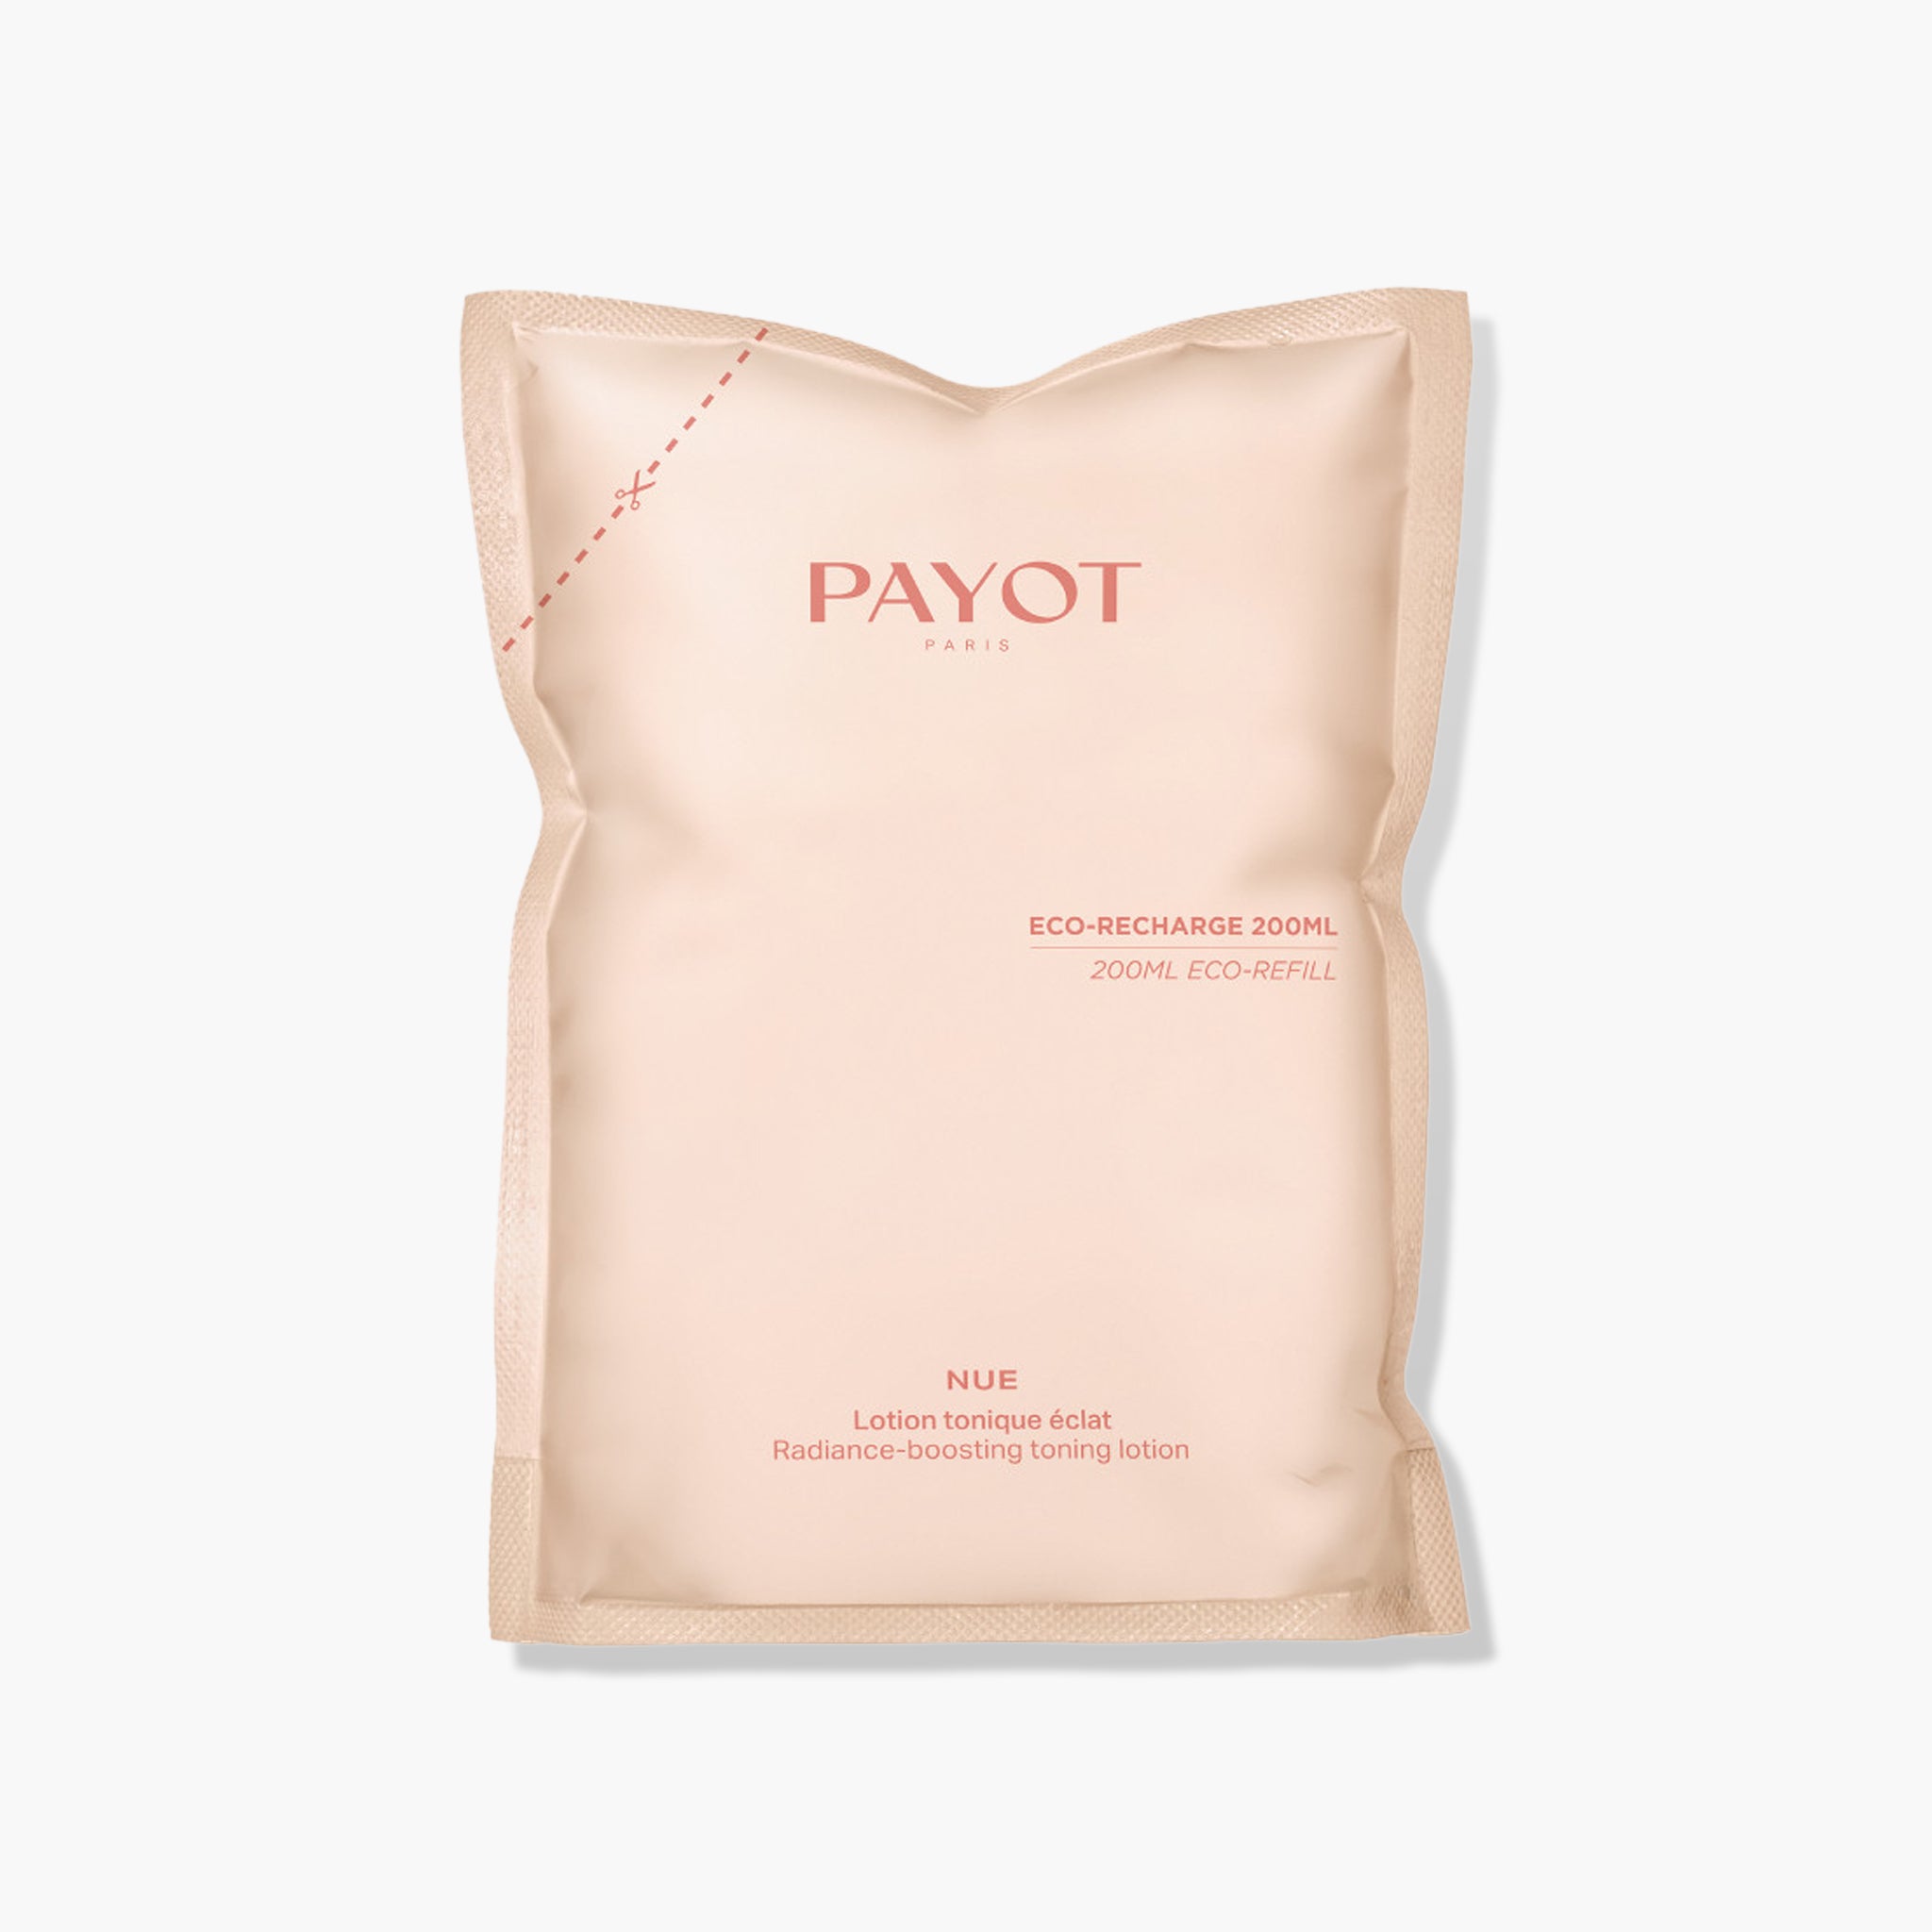 Payot Nue Radiance-Boosting Toning Lotion REFILL